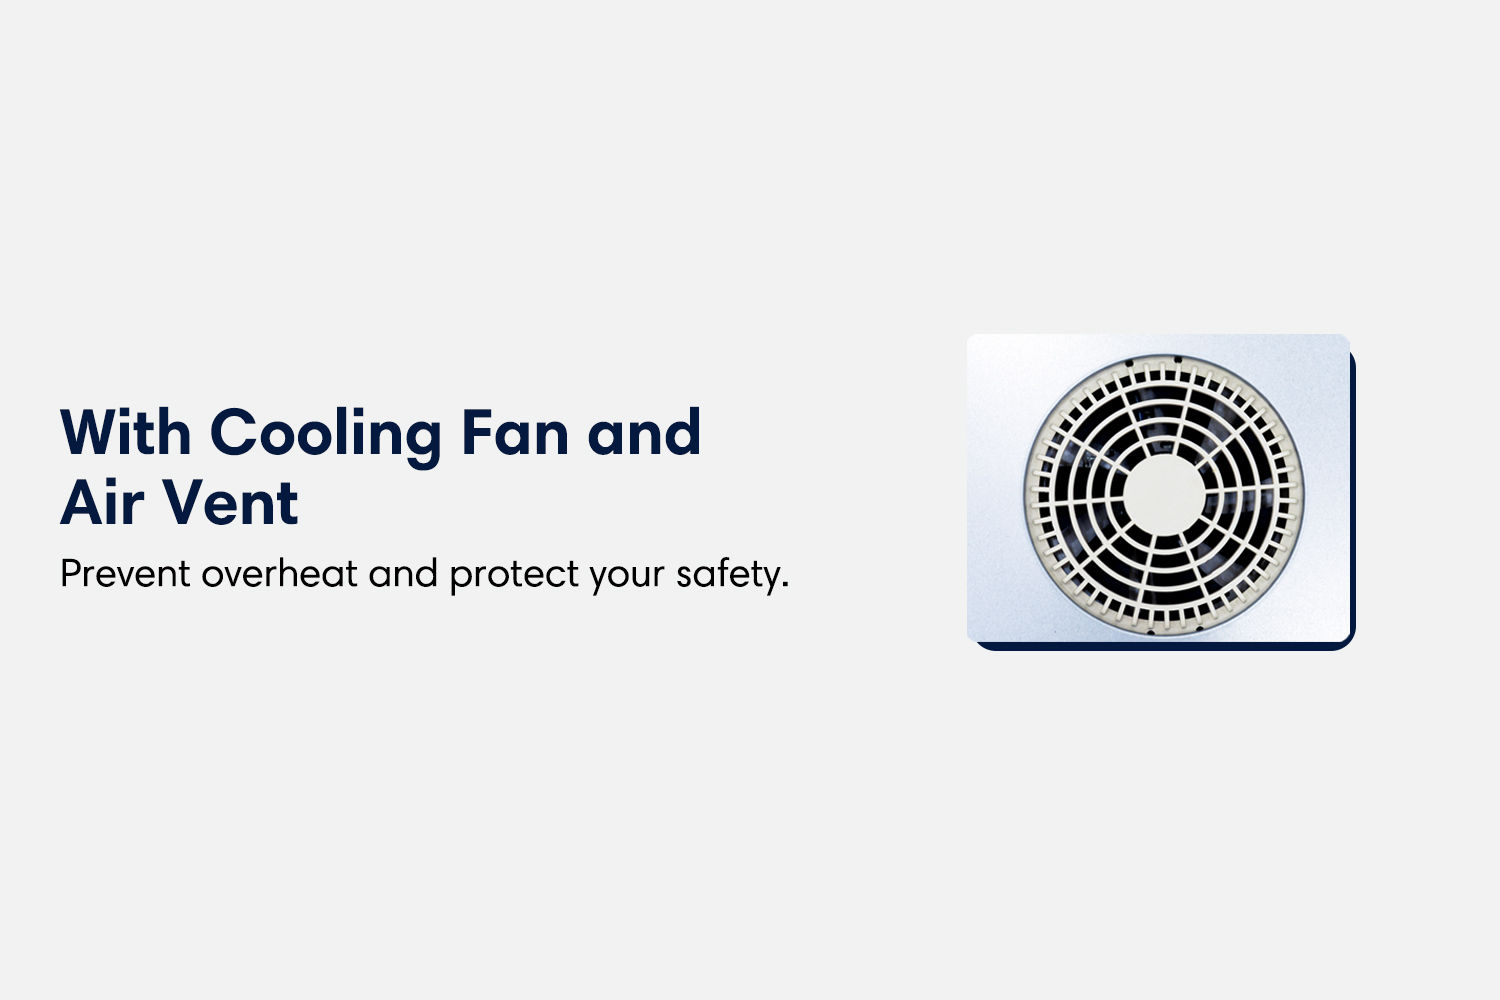 With cooling fan and air vent. Prevent overheat and protect your safety.